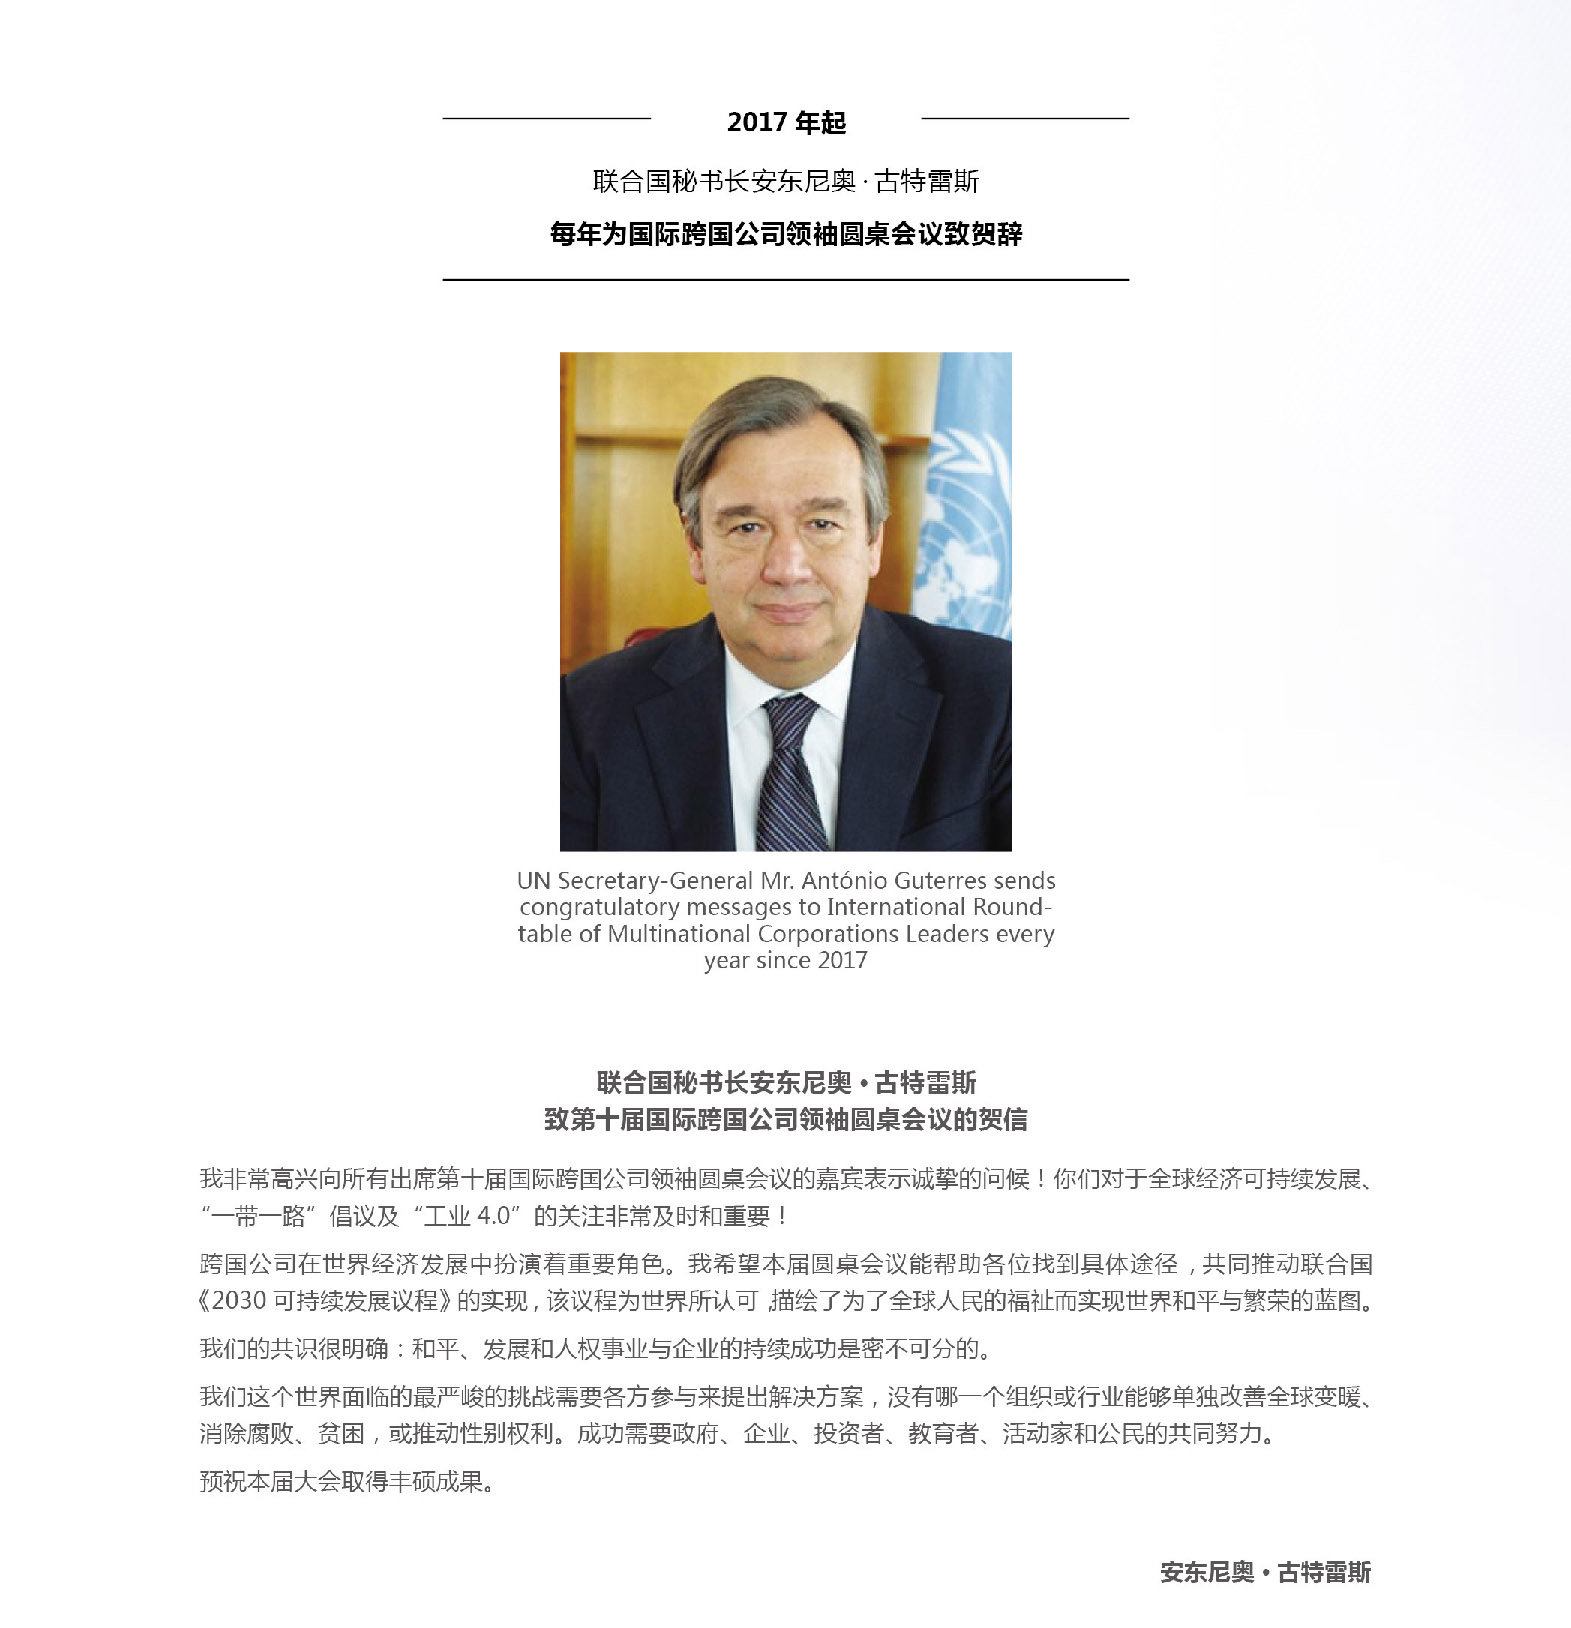 UN Secretary-General Mr. António Guterres sends congratulatory messages to International Roundtable of Multinational Corporations Leaders every year since 2017